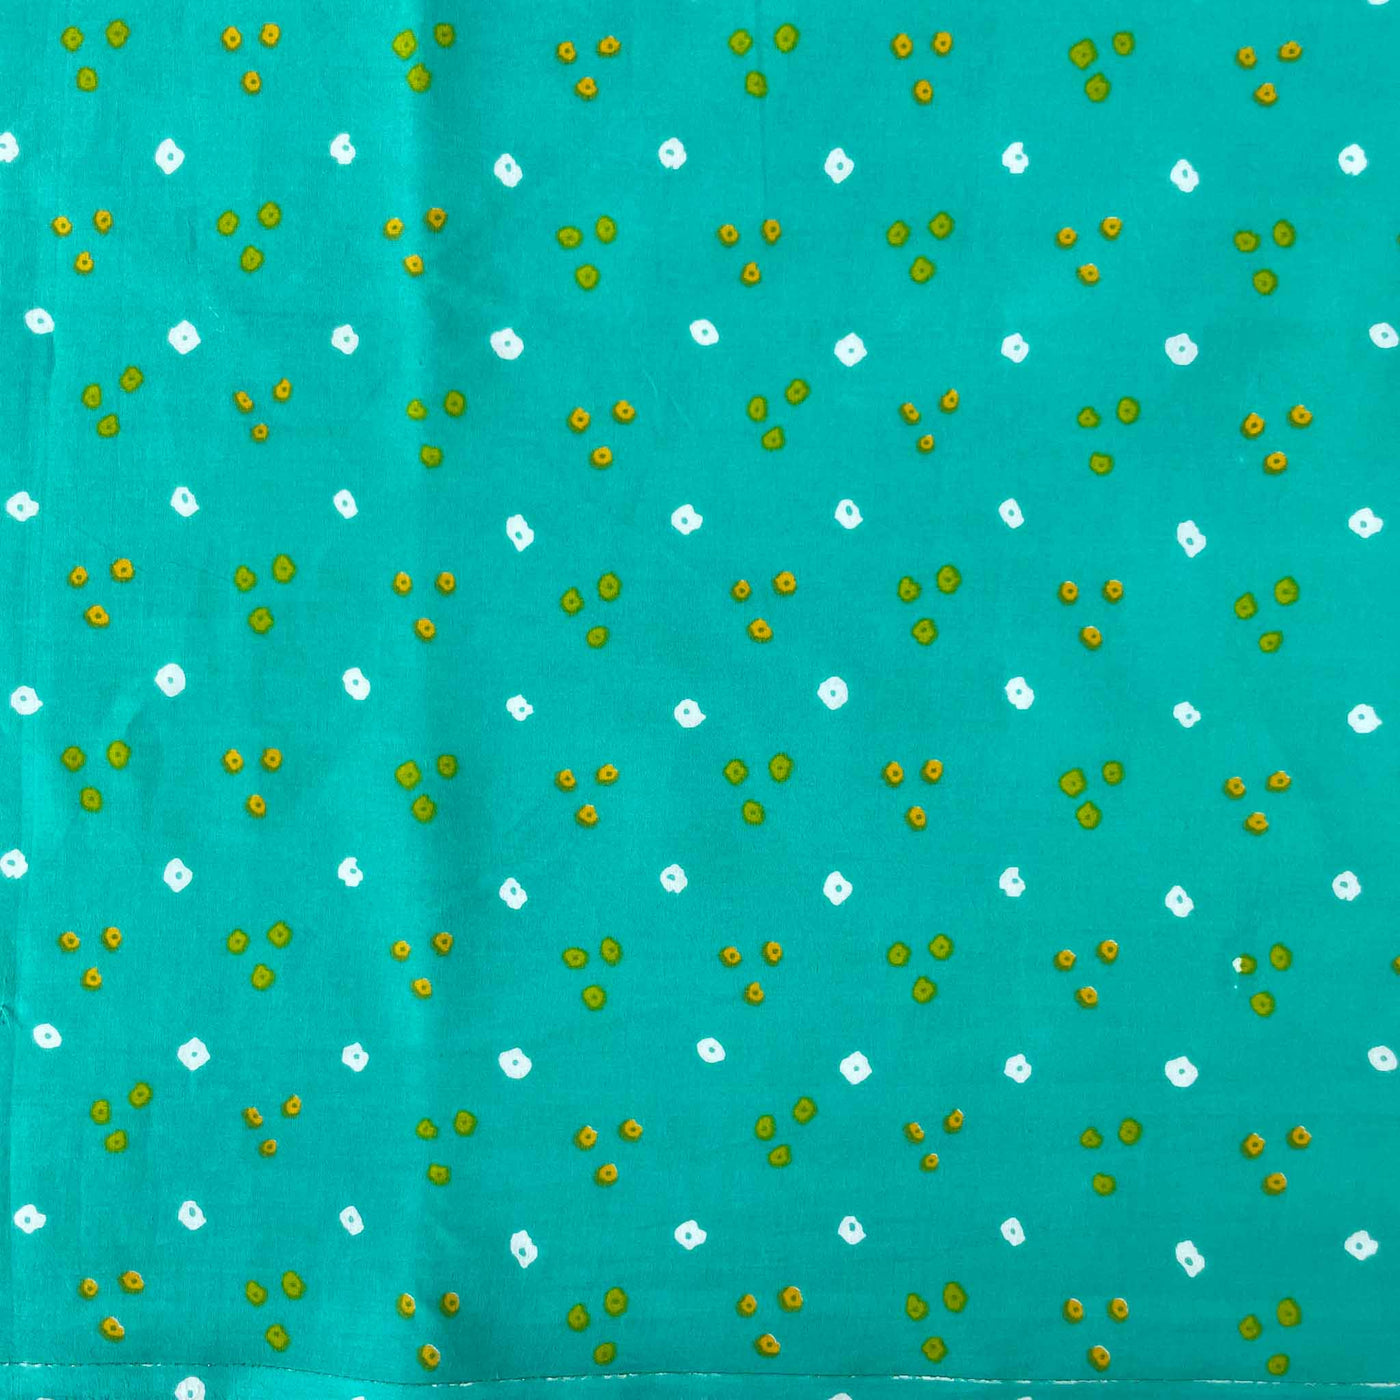 Fabric Pandit Cut Piece (CUT PIECE) Light Turquoise and Yellow Dots and Triangles Bandhani Pattern Hand Block Printed Pure Cotton Fabric Width (43 inches)